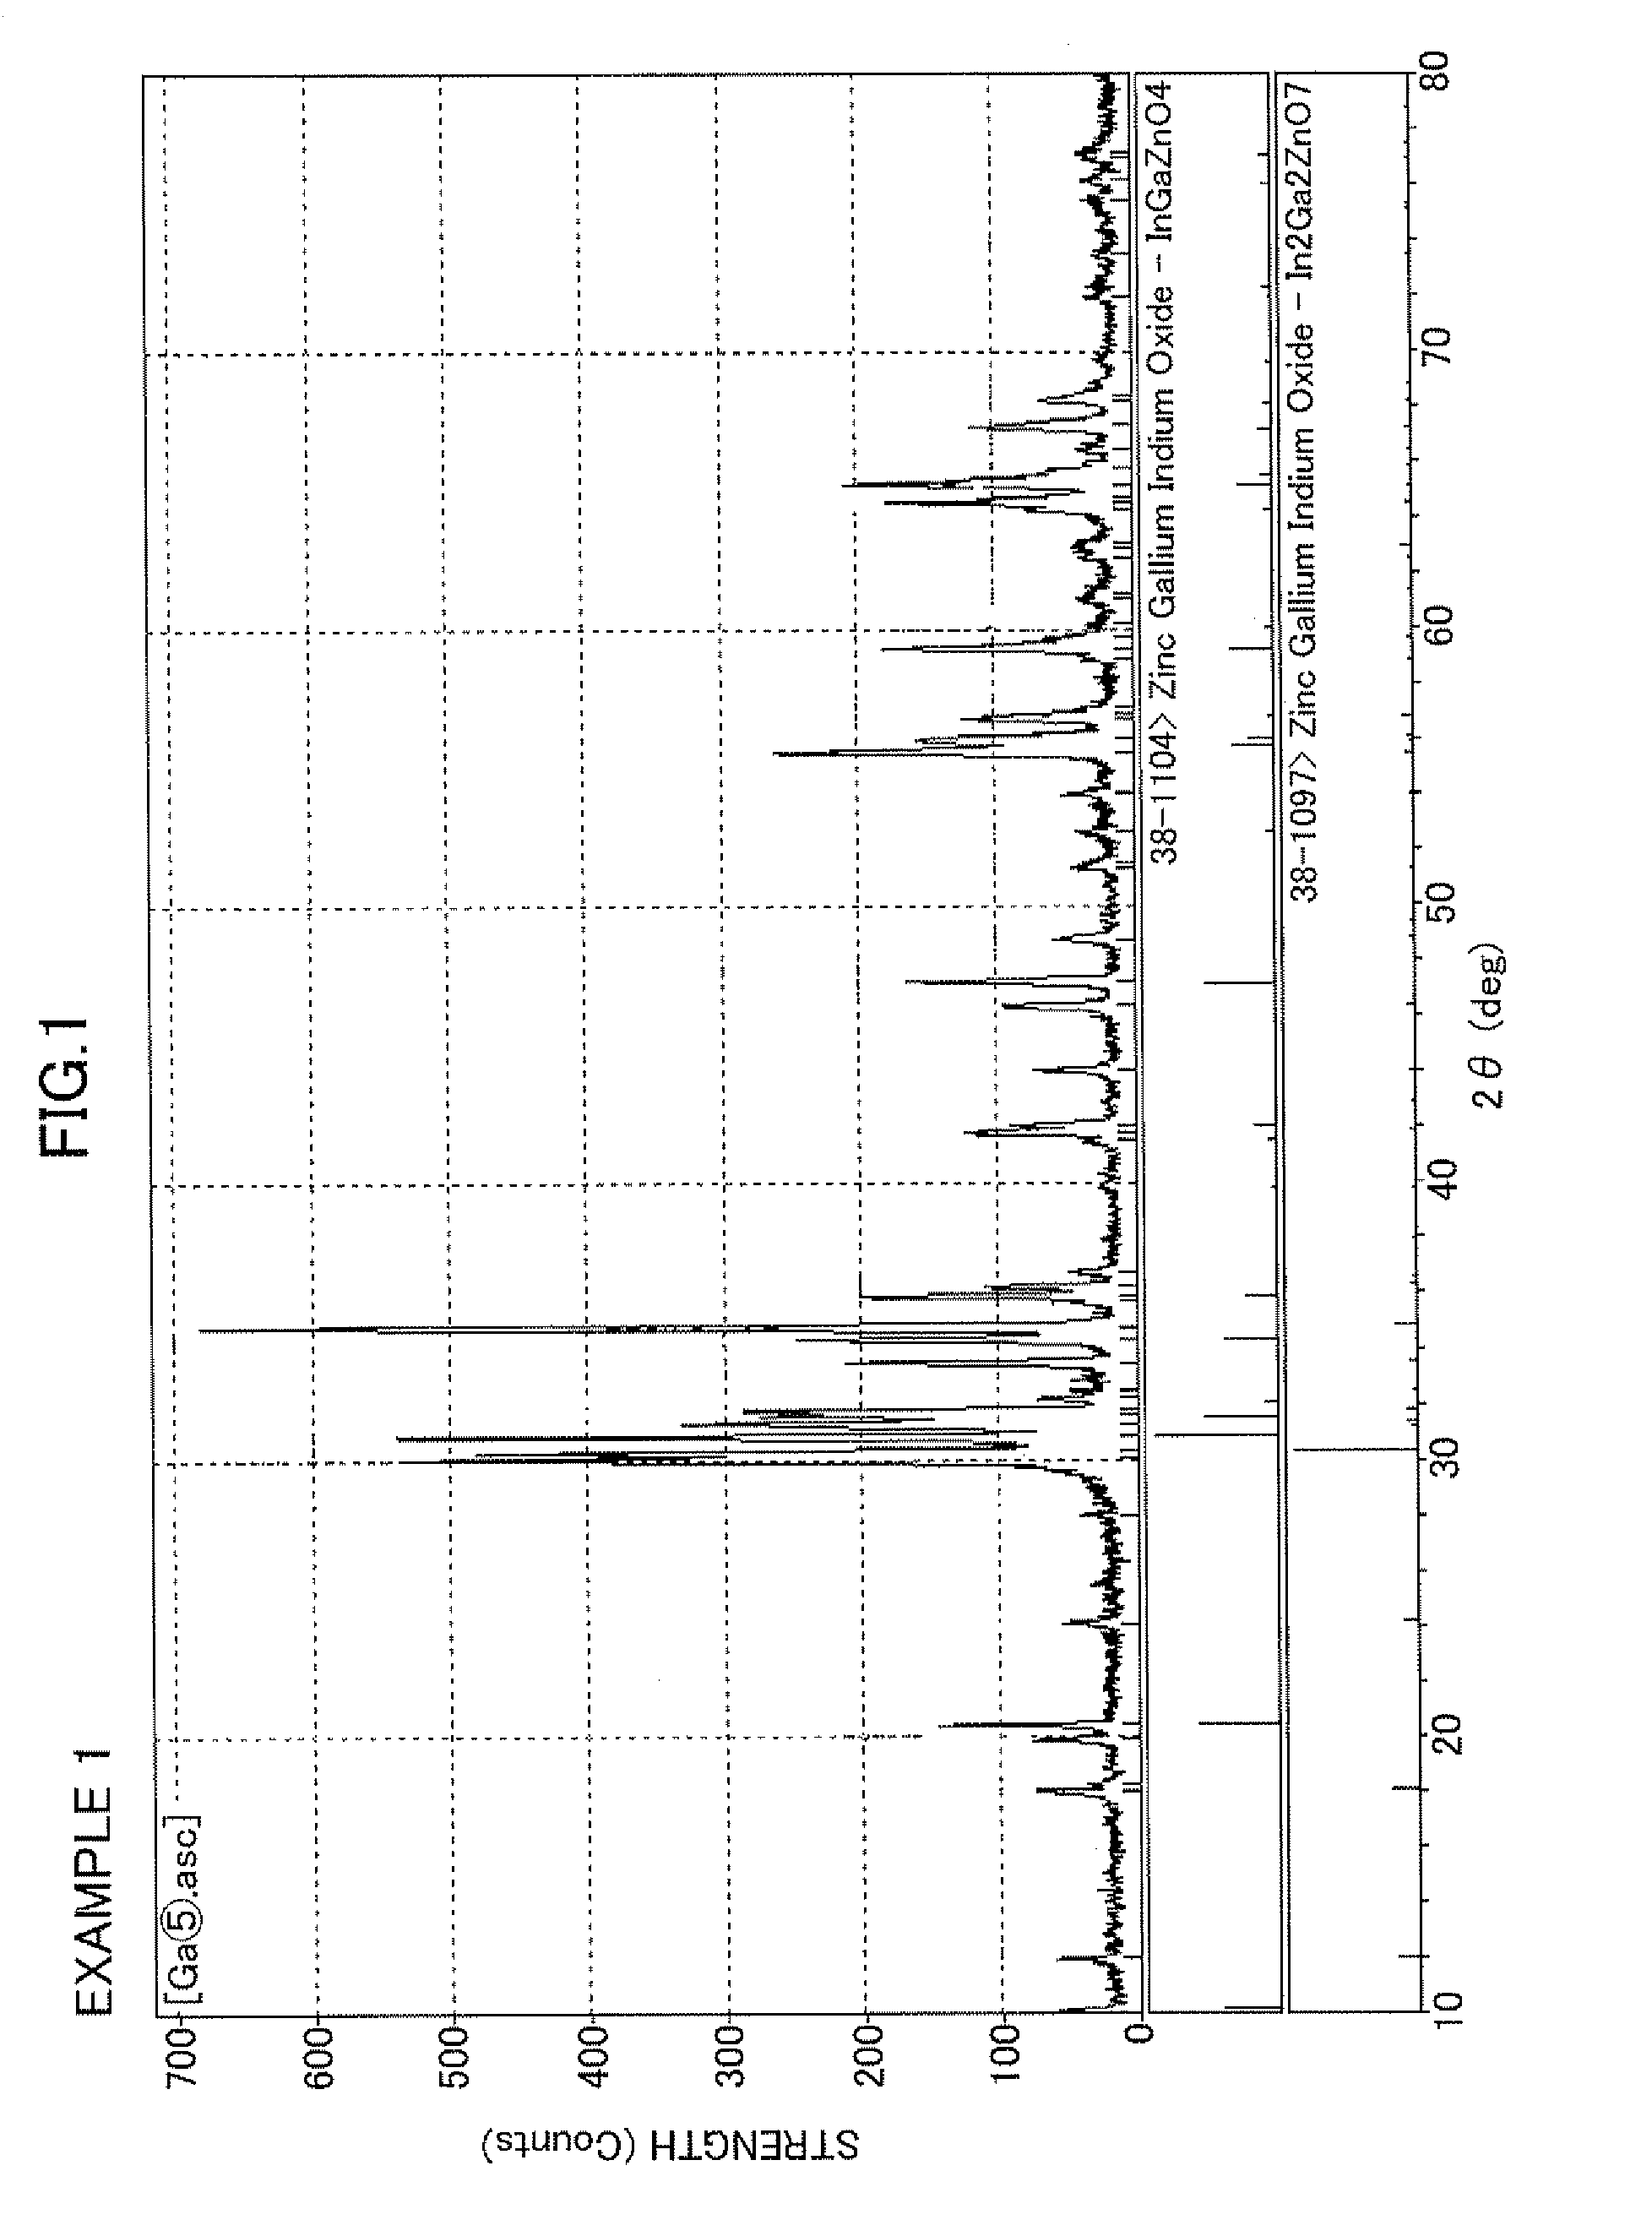 Sputtering target, method for forming amorphous oxide thin film using the same, and method for manufacturing thin film transistor